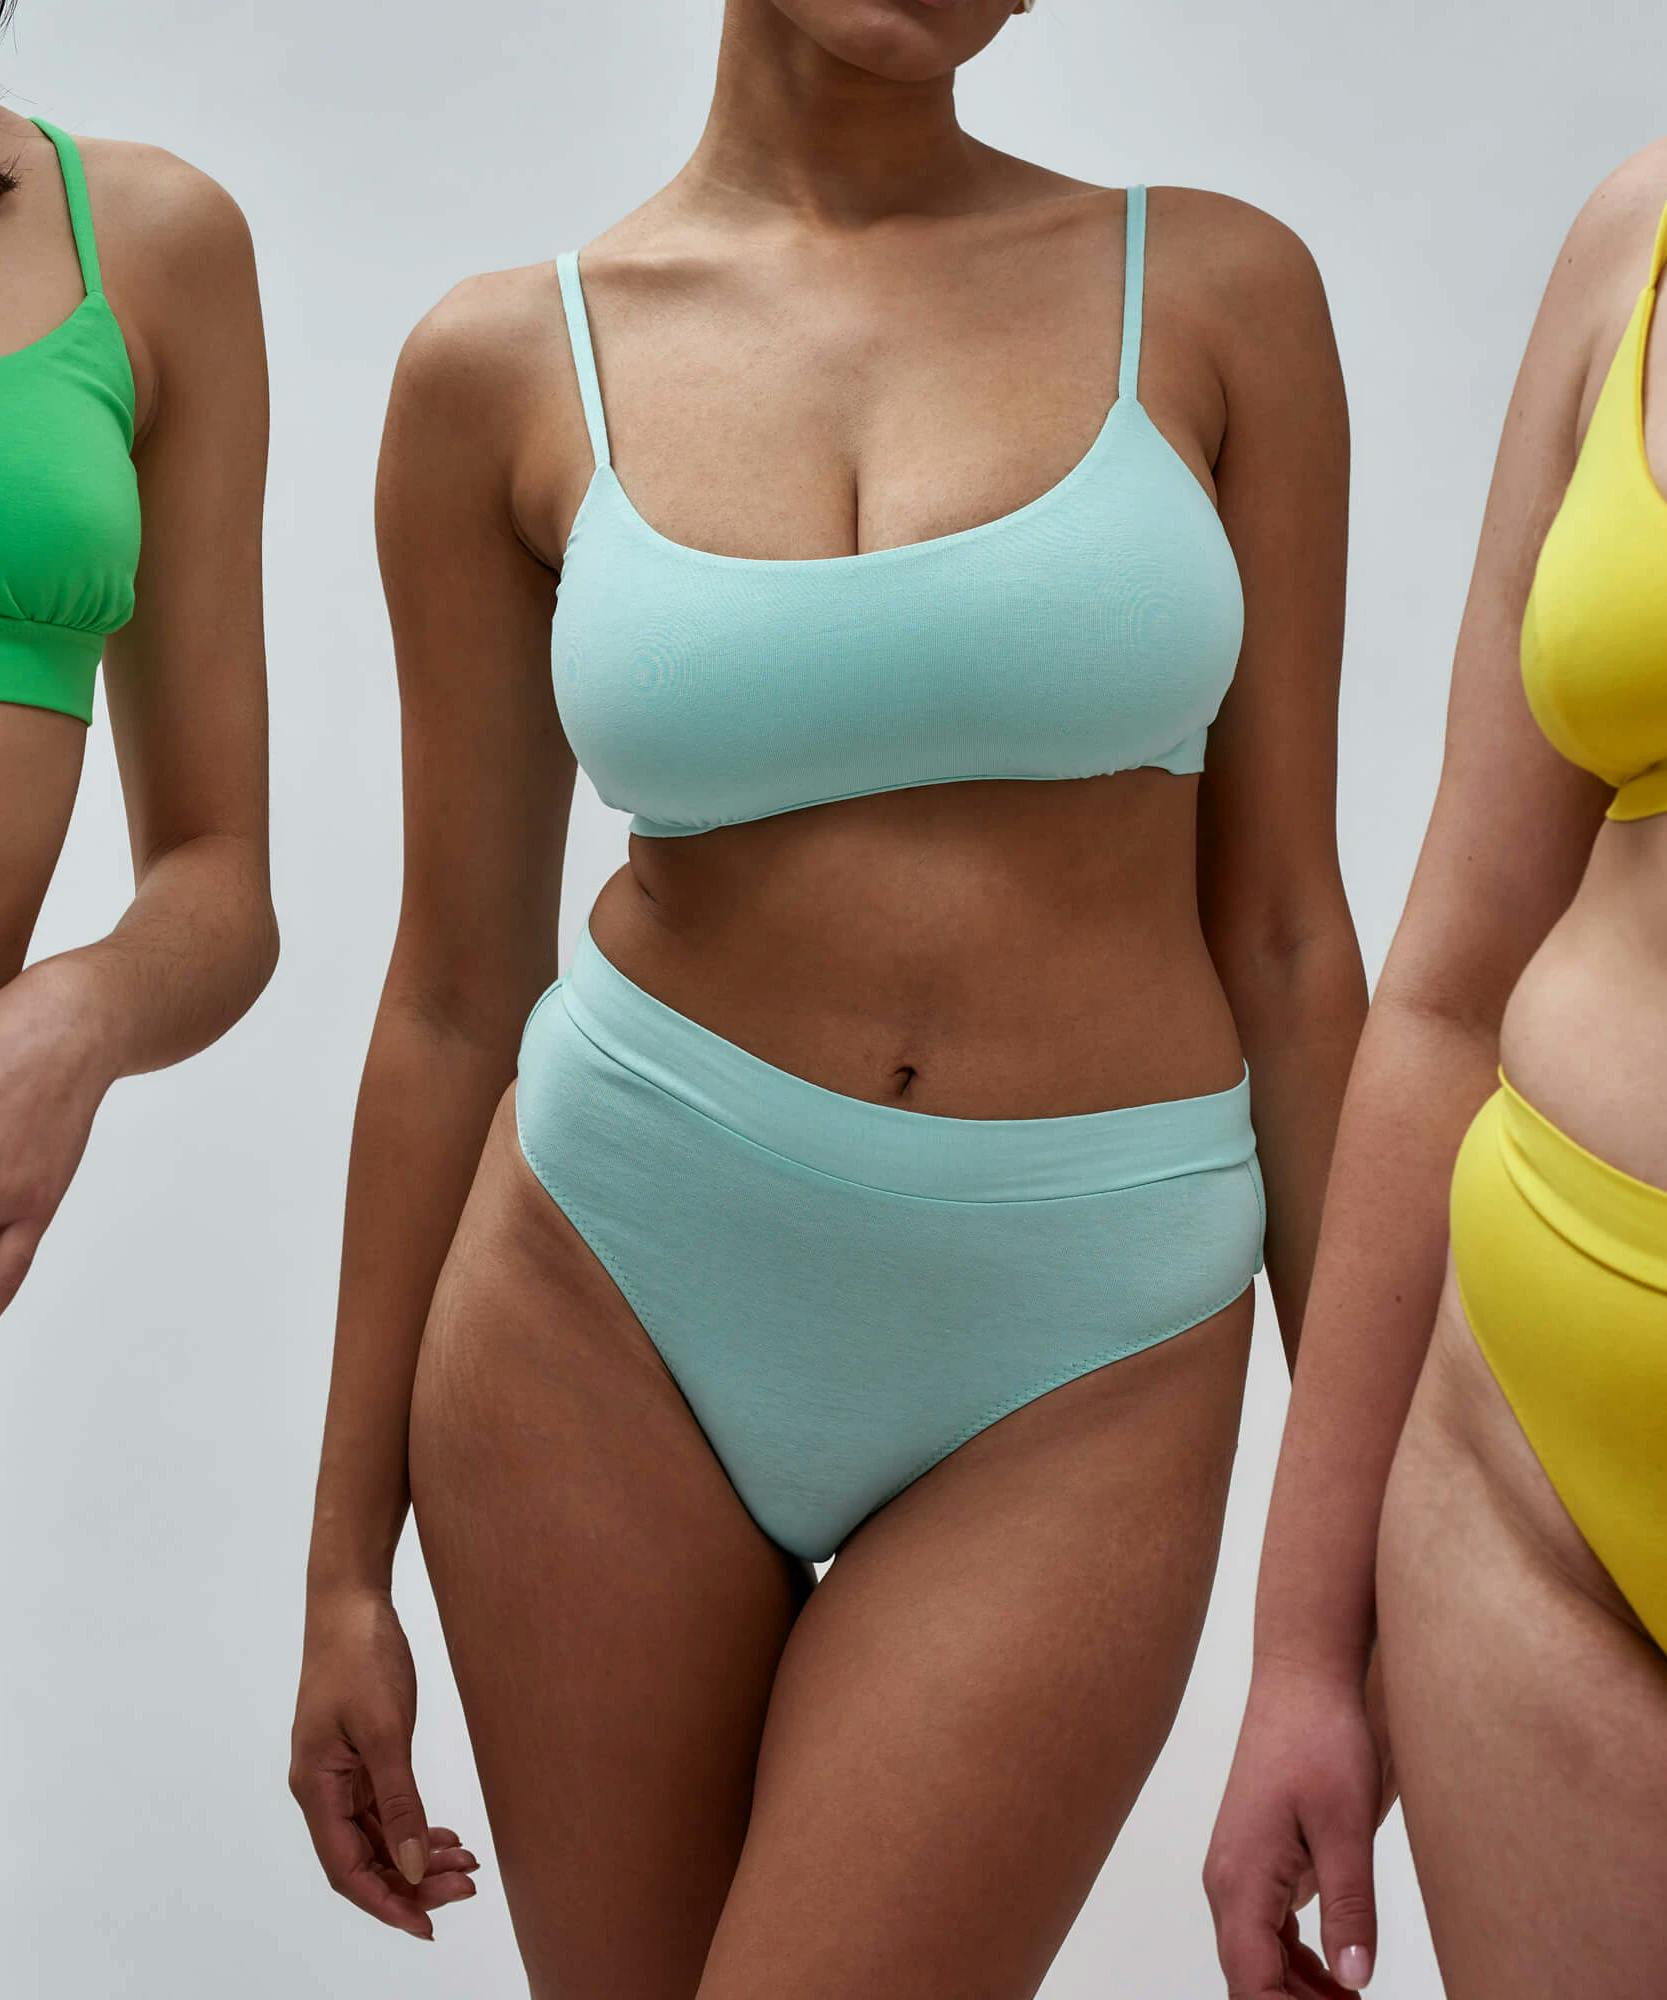 3 Lies The Body Positivity Movement Keeps Pushing That Are Hurting Women shutterstock